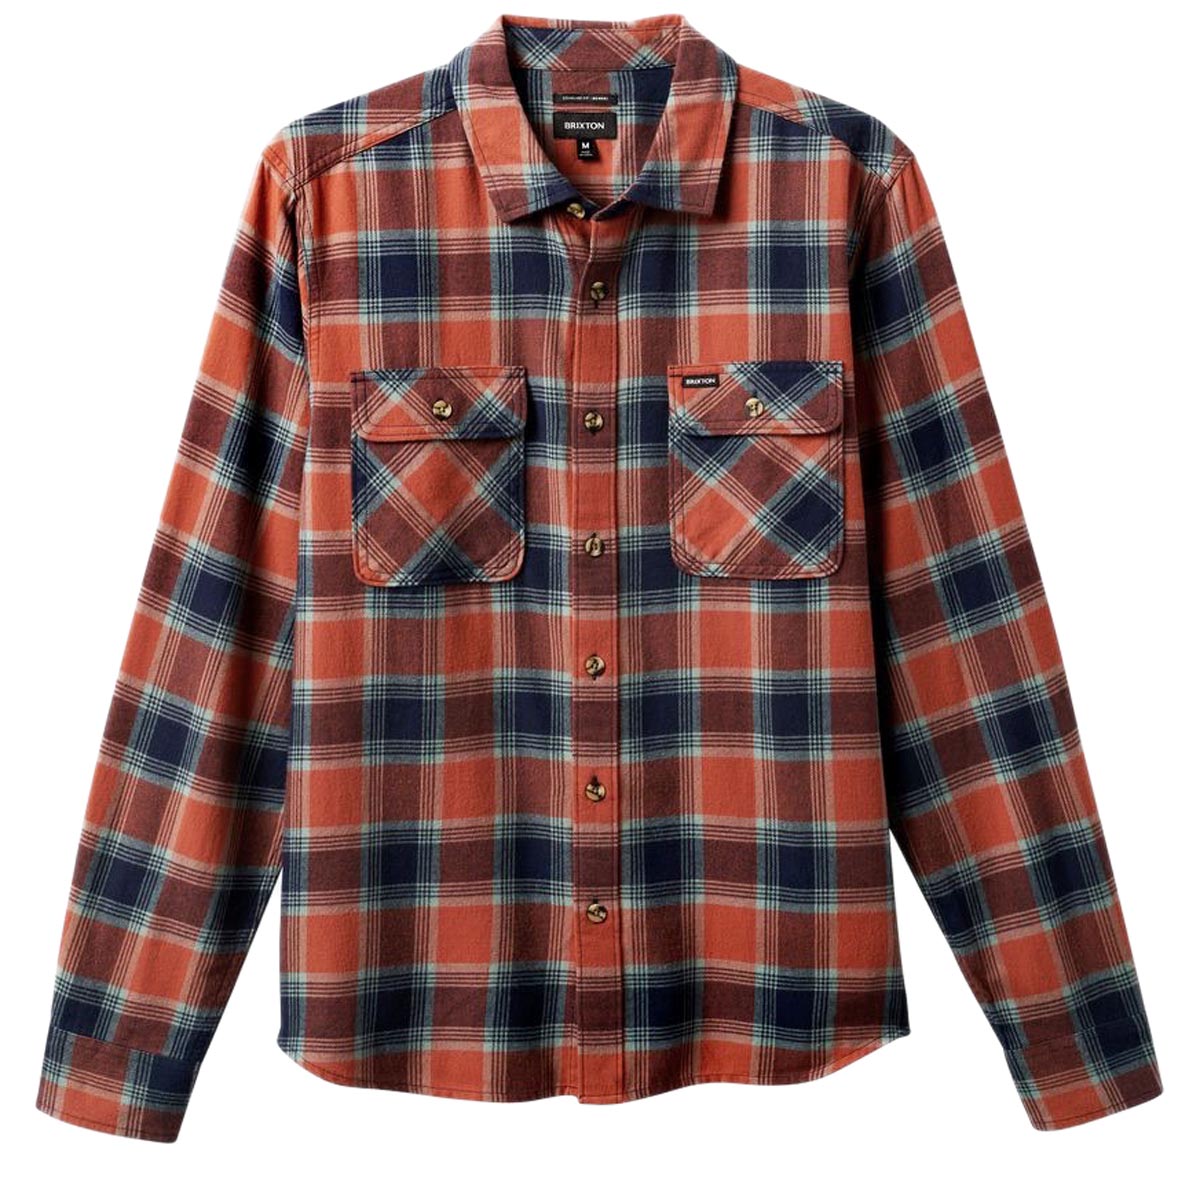 Brixton Bowery Lw Ultra Flannel Shirt - Terracotta/Chinois Green image 2